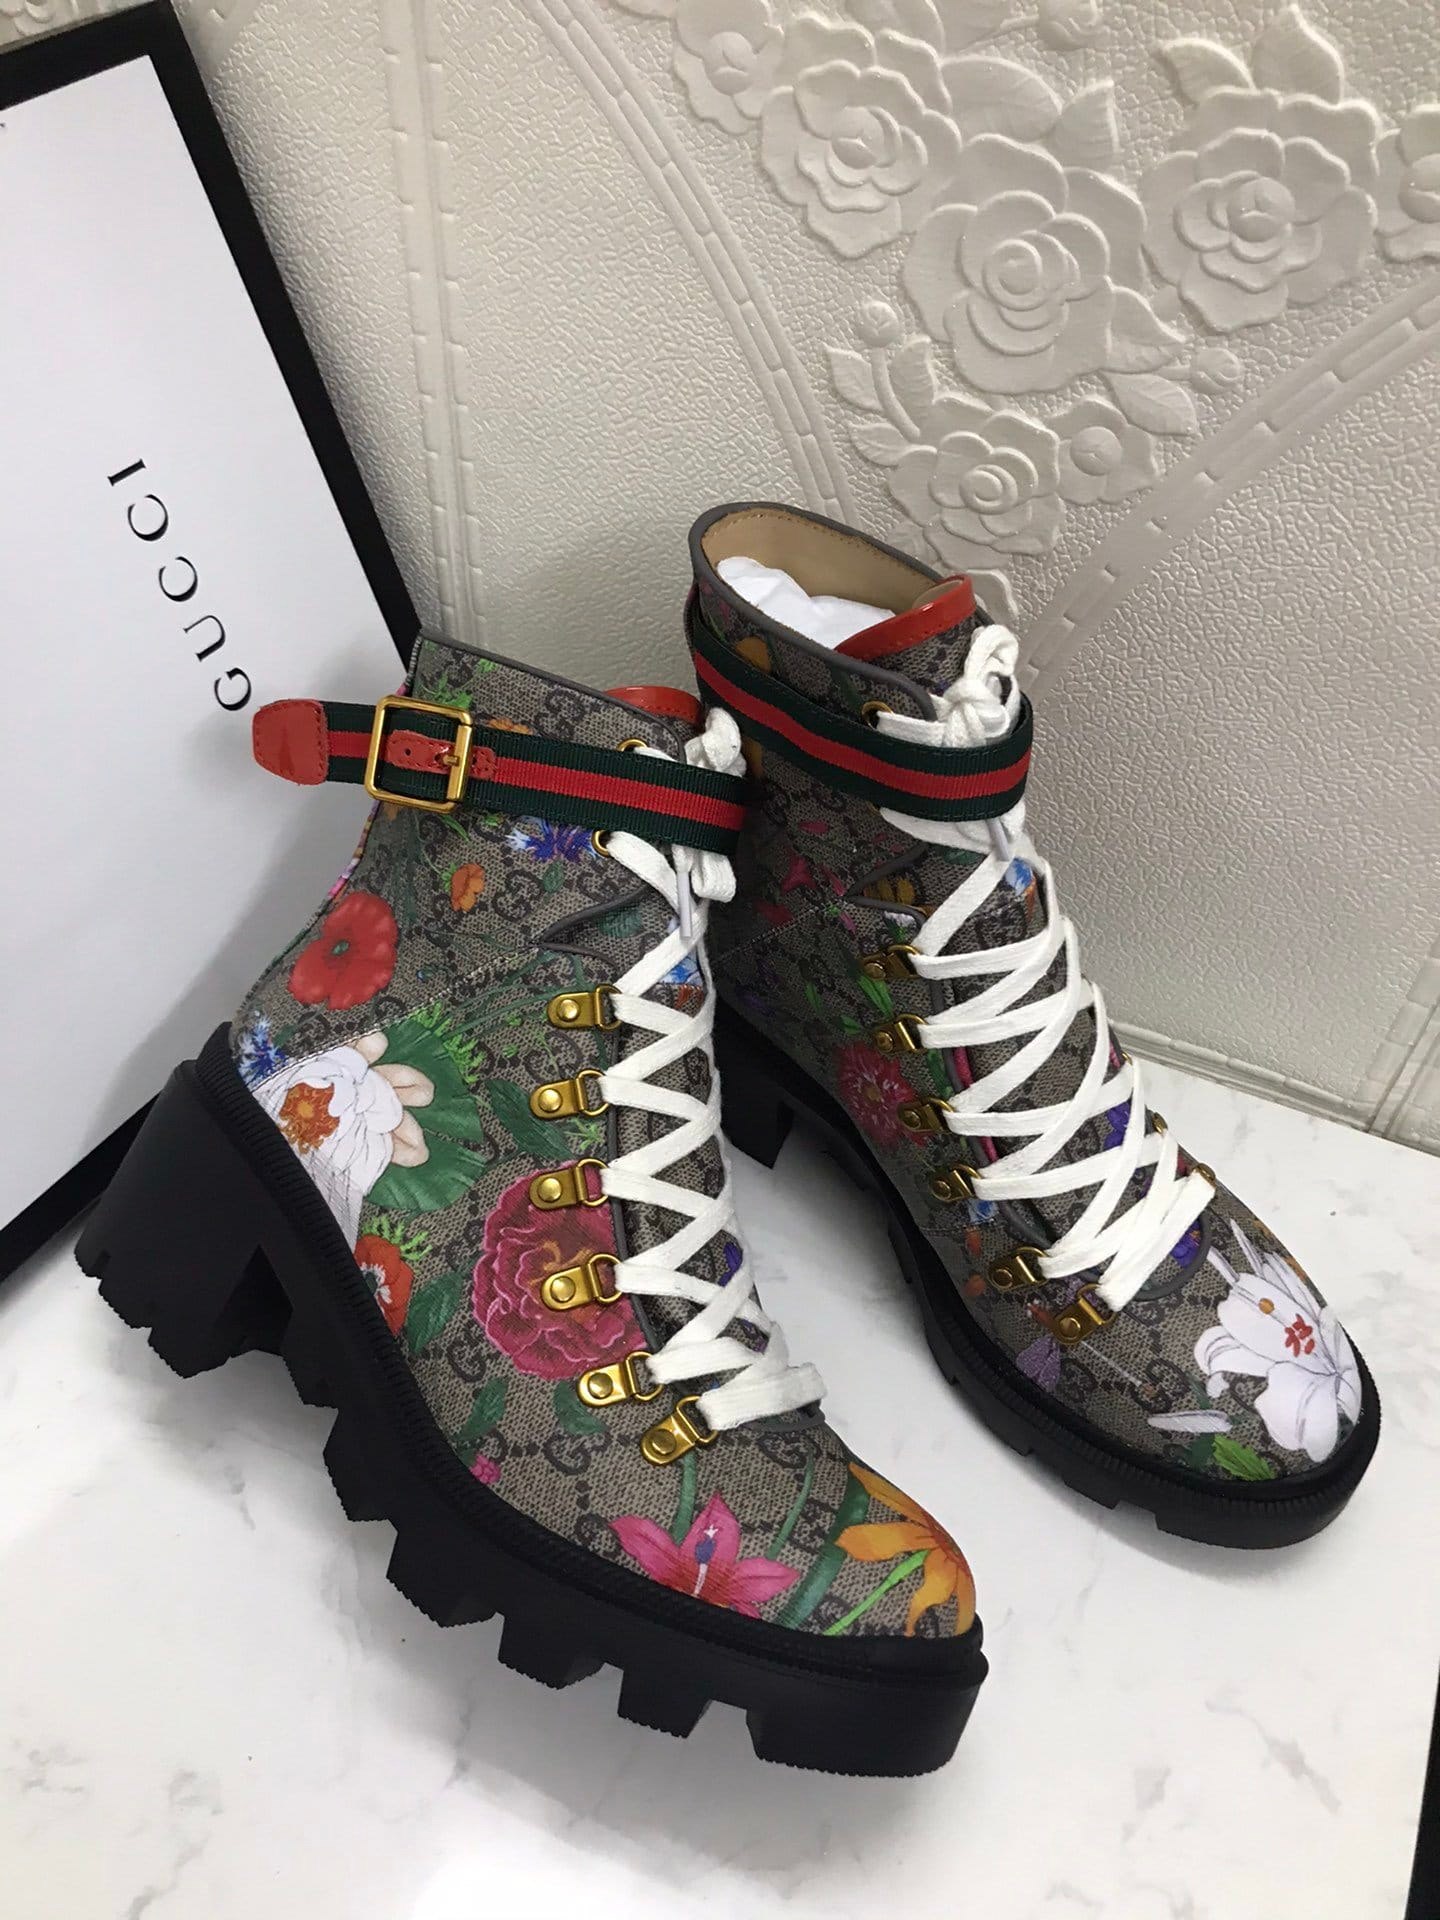 Prominent Grudge Spectacular Gucci Floral Boots - Payhip